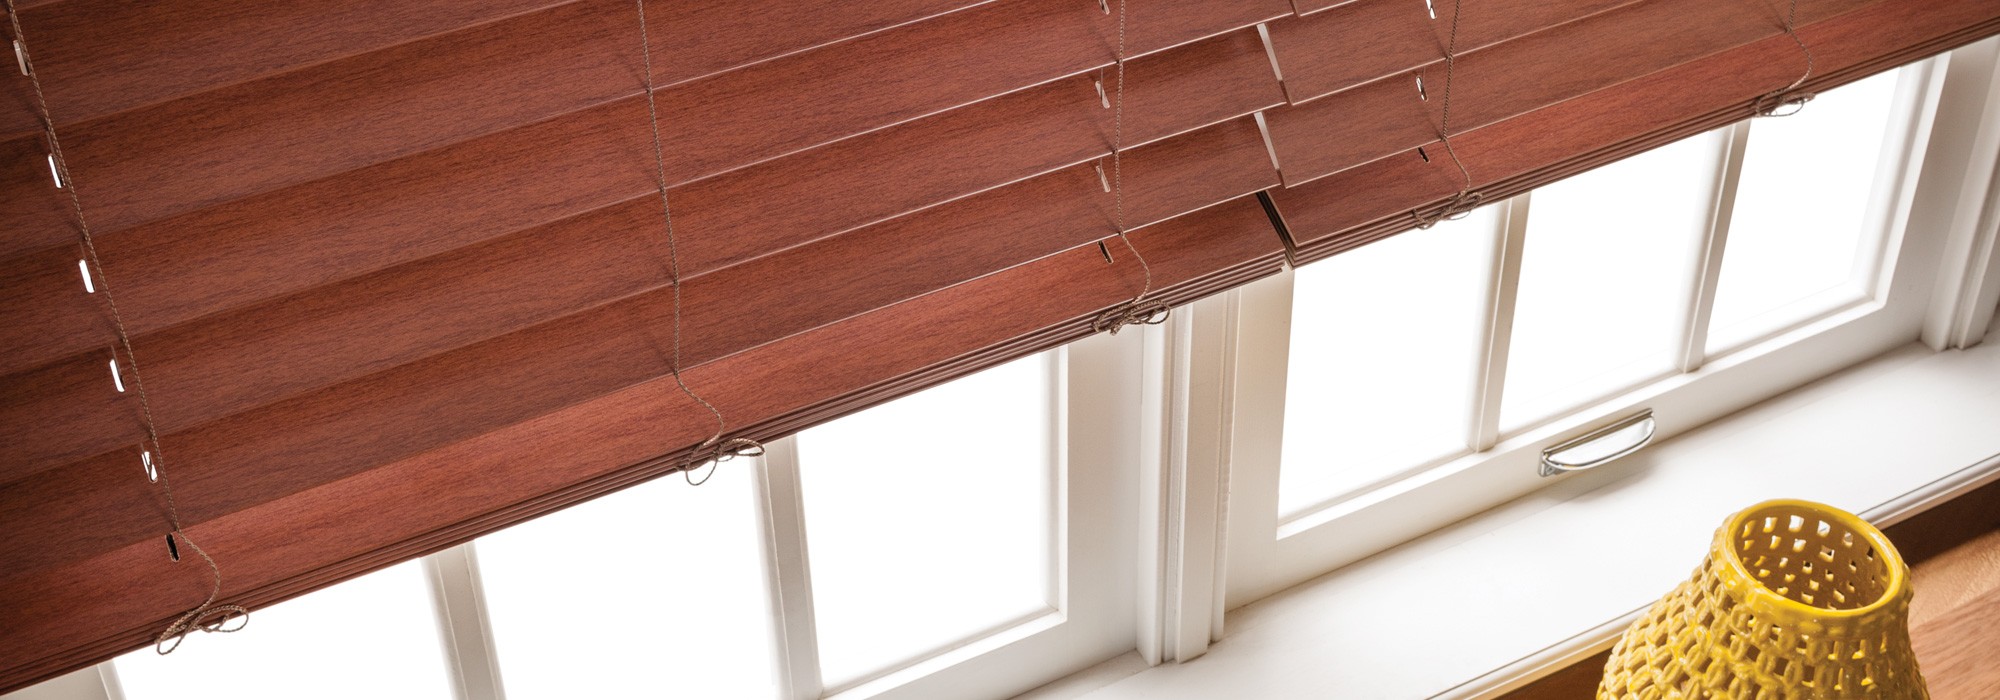 Blinds look great as long as slats remain straight - faux wood vs real wood blinds